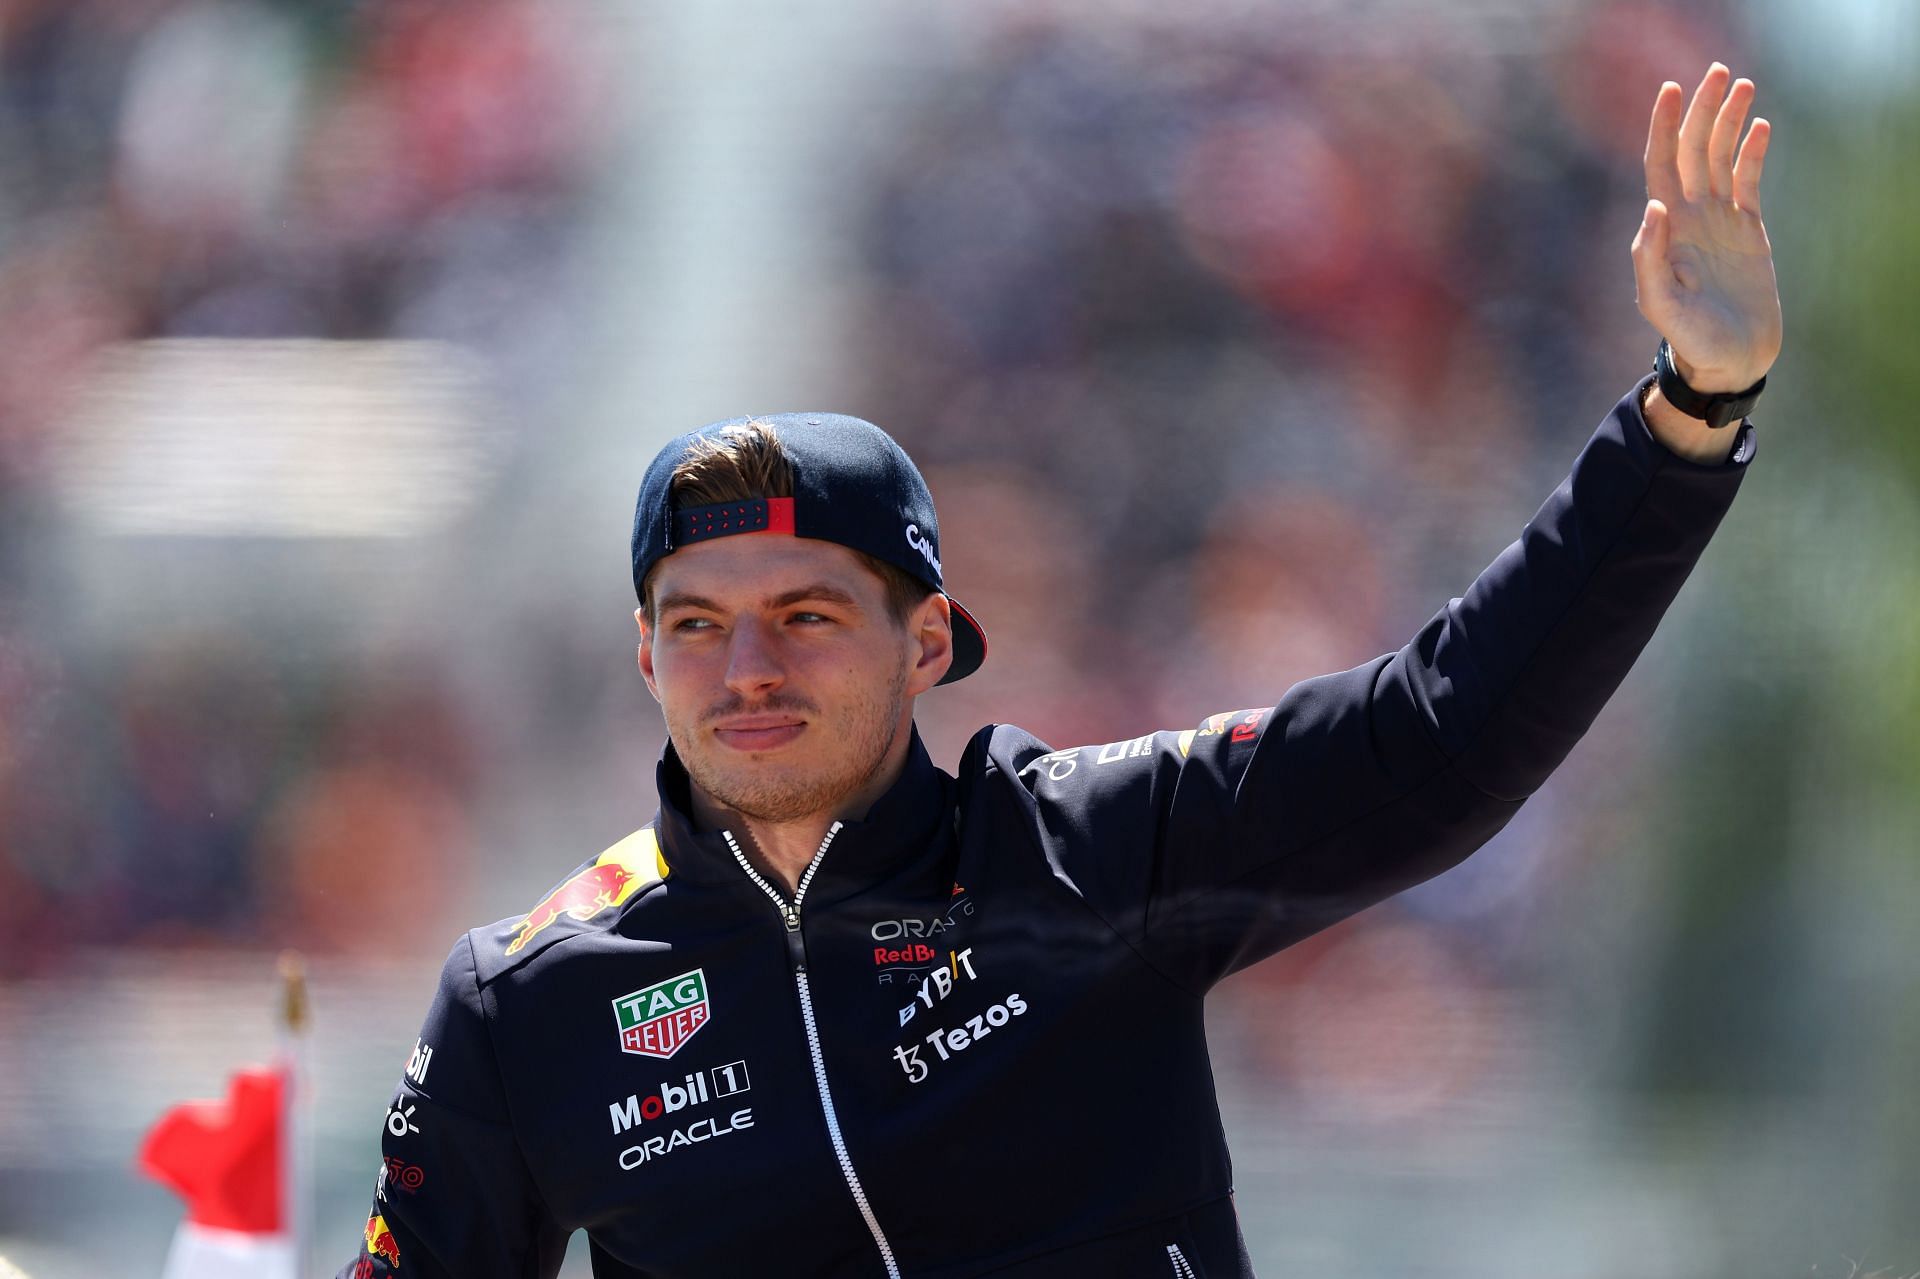 That&#039;s win #6 for Max Verstappen at the 2022 F1 Candian GP